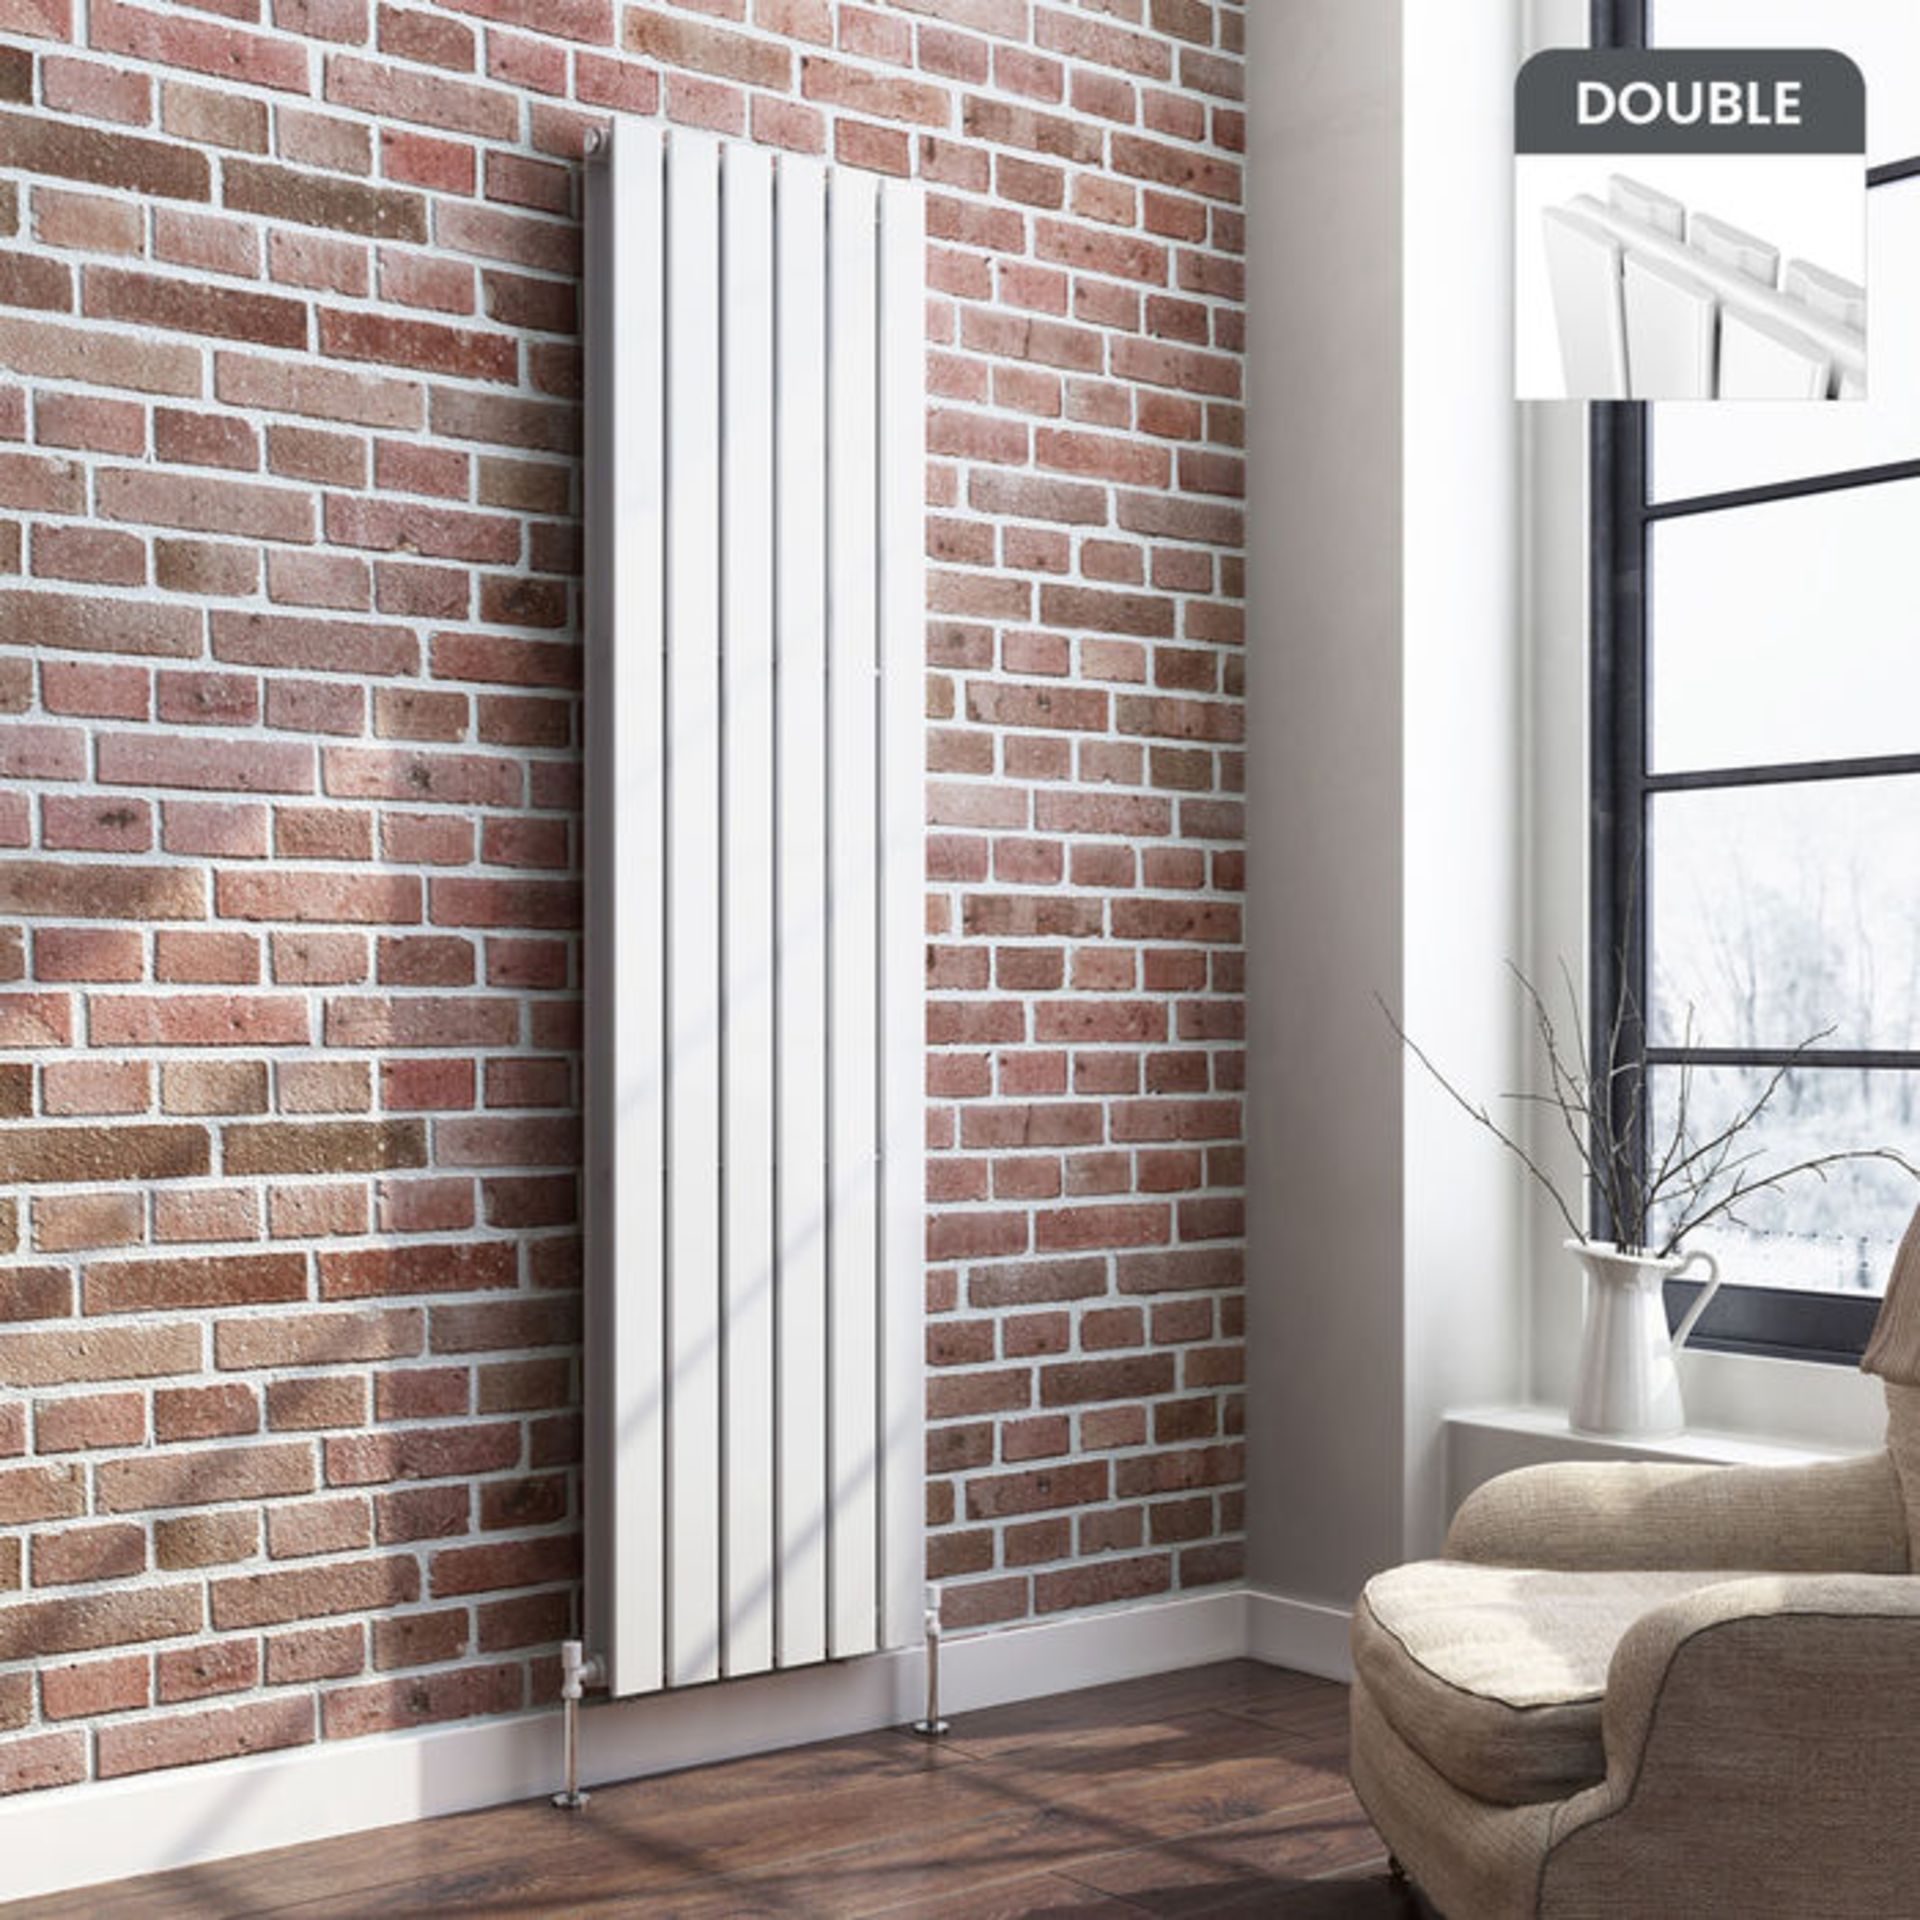 New & Boxed 1800x452mm Gloss White Double Flat Panel Vertical Radiator. RRP £499.99.RC238.We love